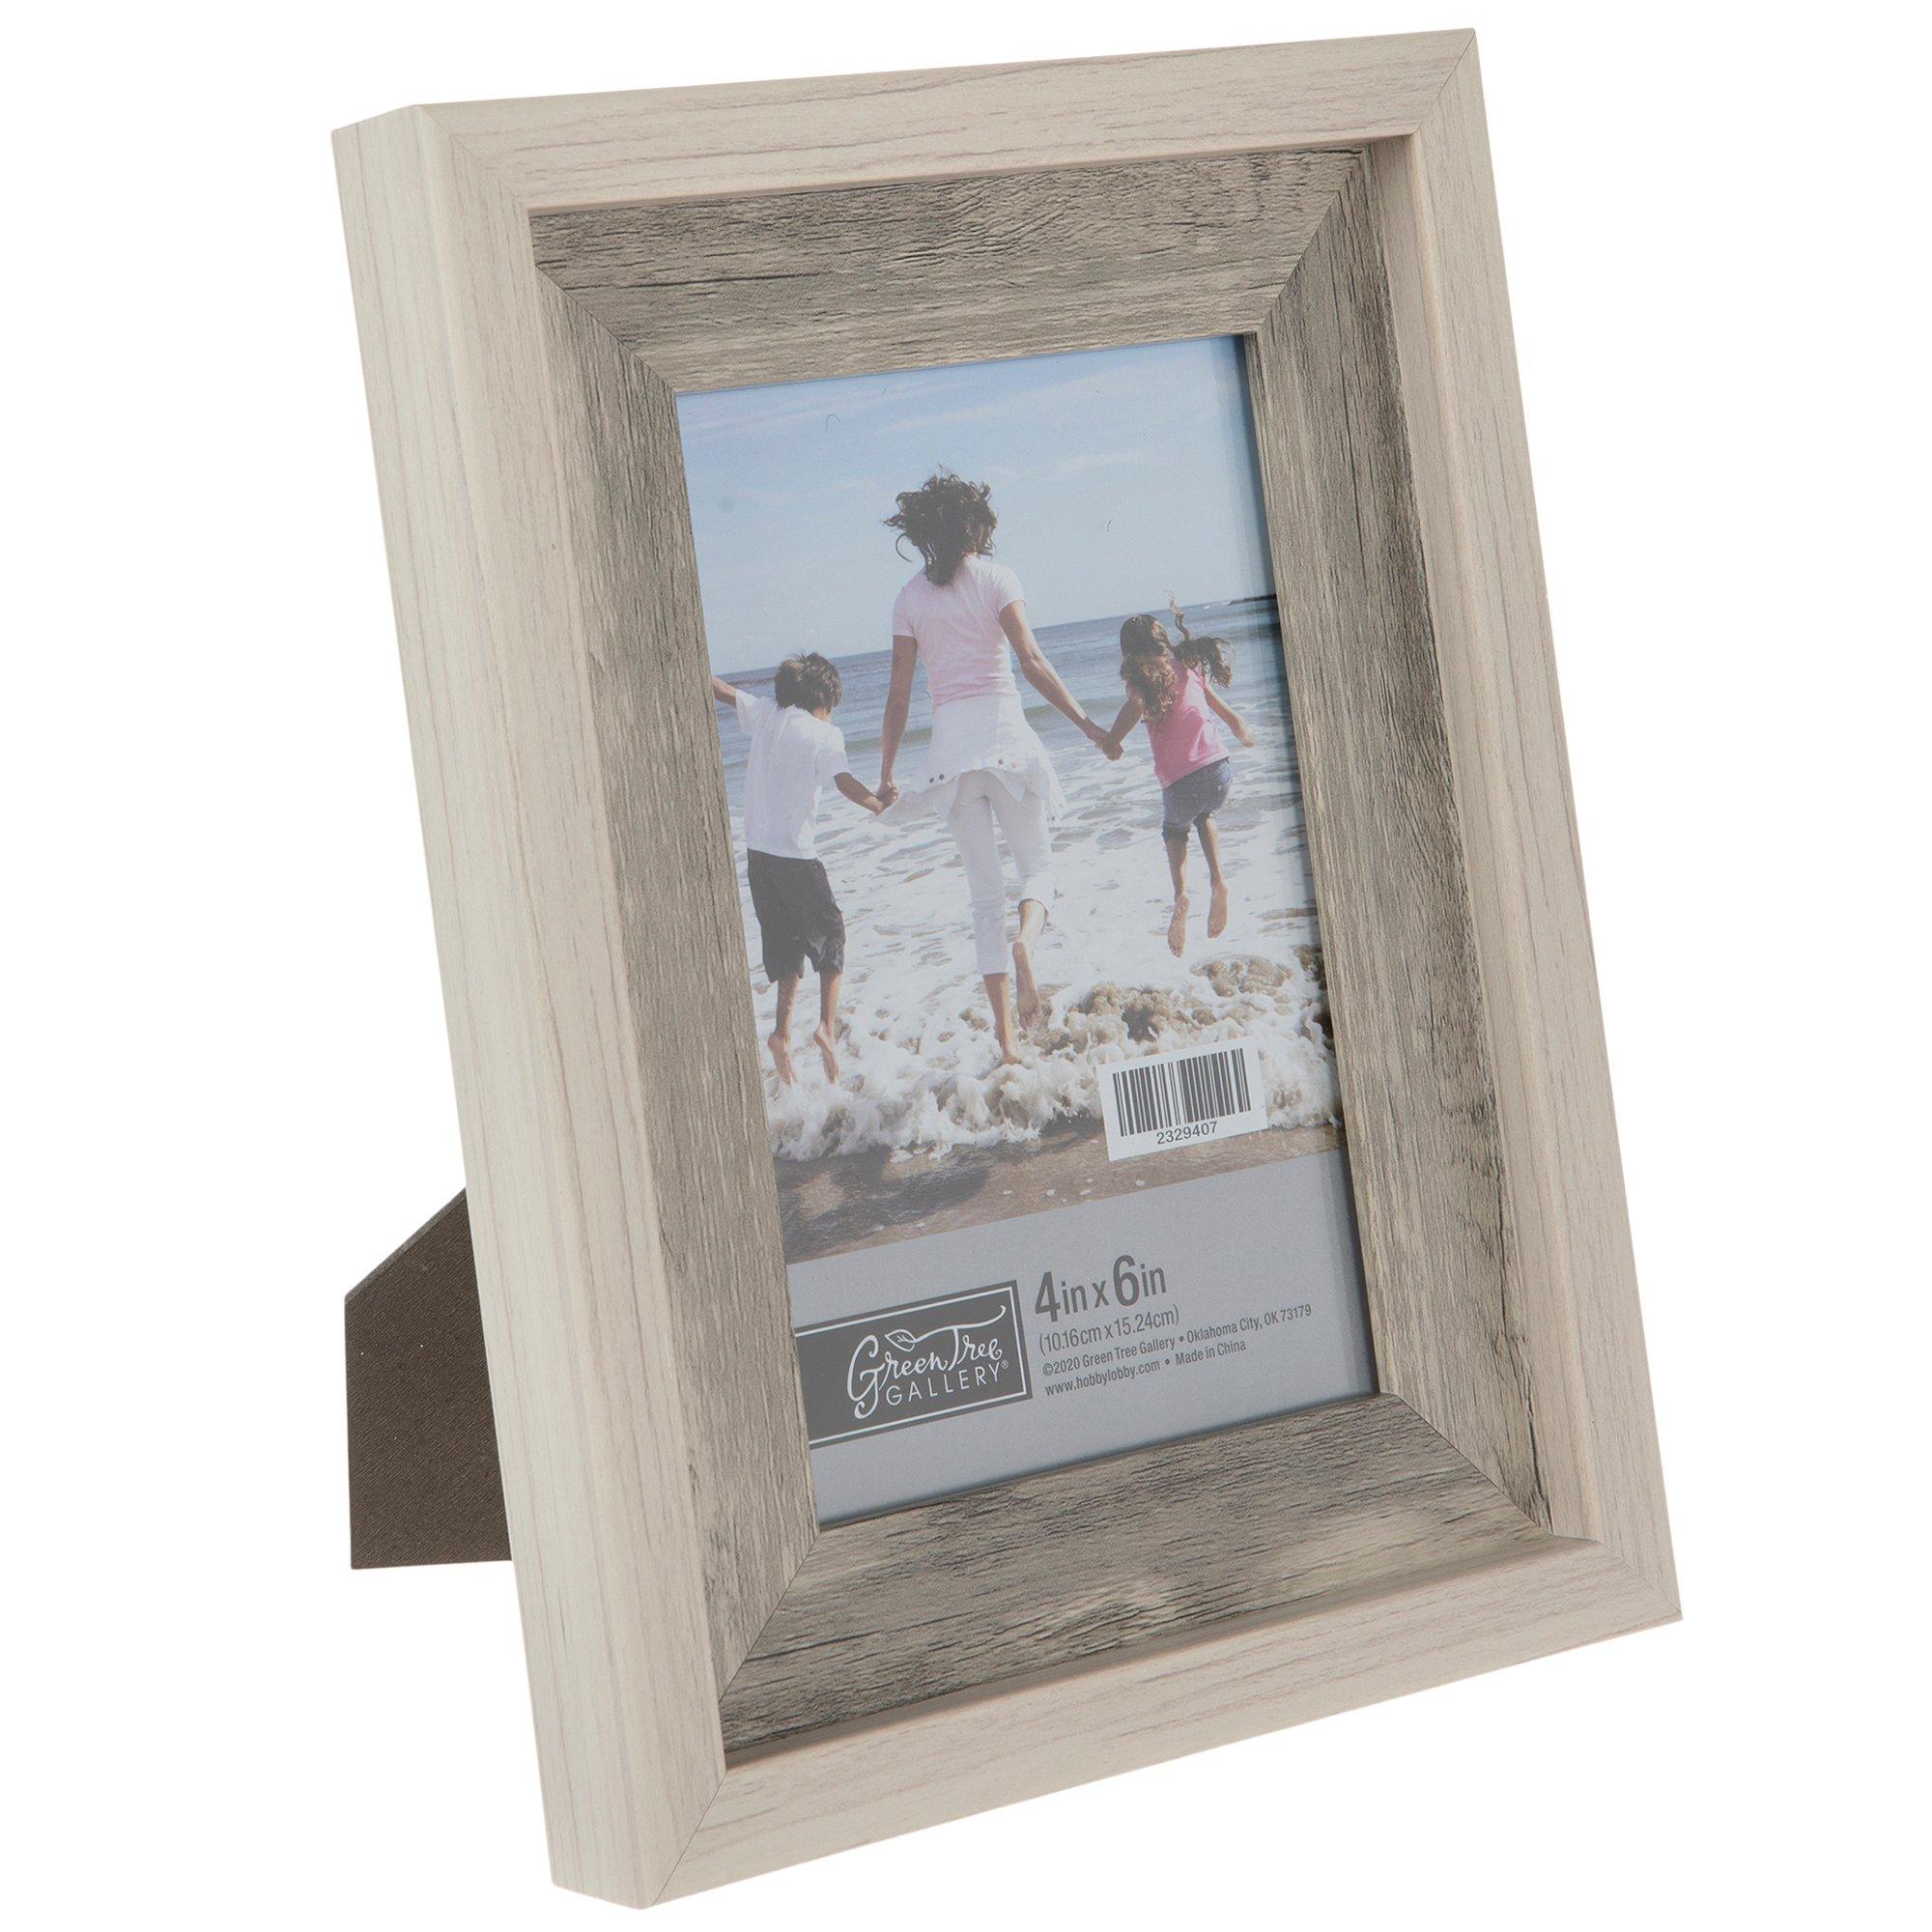 COASTAL WHITE WASH w/INNER WHITE BORDER 4x6 frame by Malden® - Picture  Frames, Photo Albums, Personalized and Engraved Digital Photo Gifts -  SendAFrame